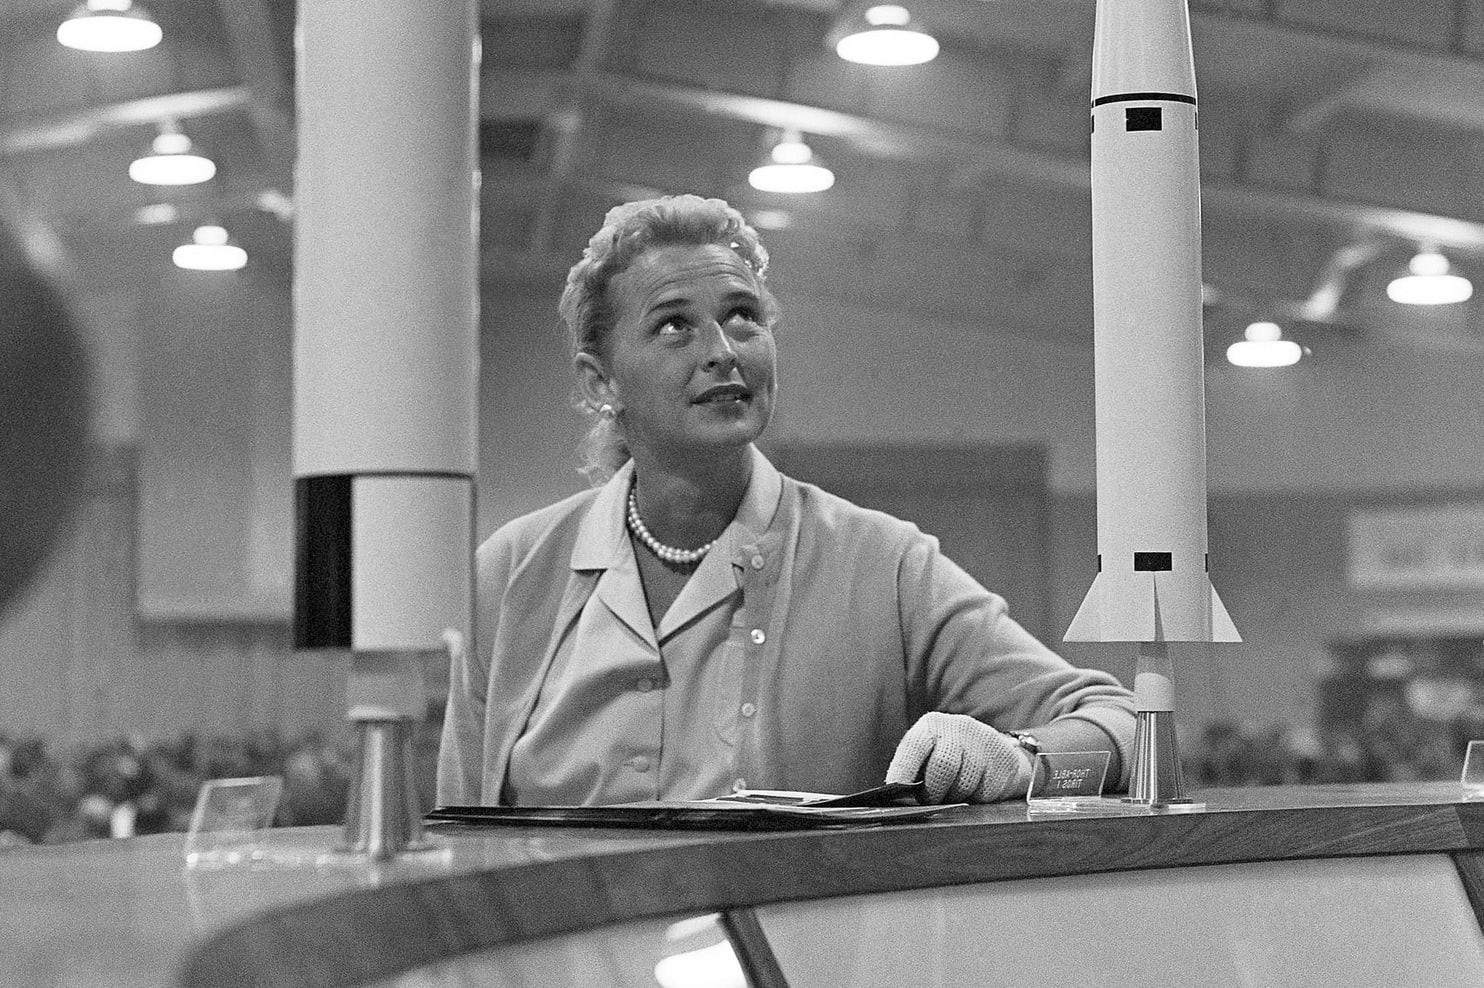 Featured image: 038 FailureNotOption Jerrie Cobb WashingtonPost Credit  - Read full post: Failure is Not an Option: Jerrie Cobb and the First Women Astronaut Trainees, Part 2